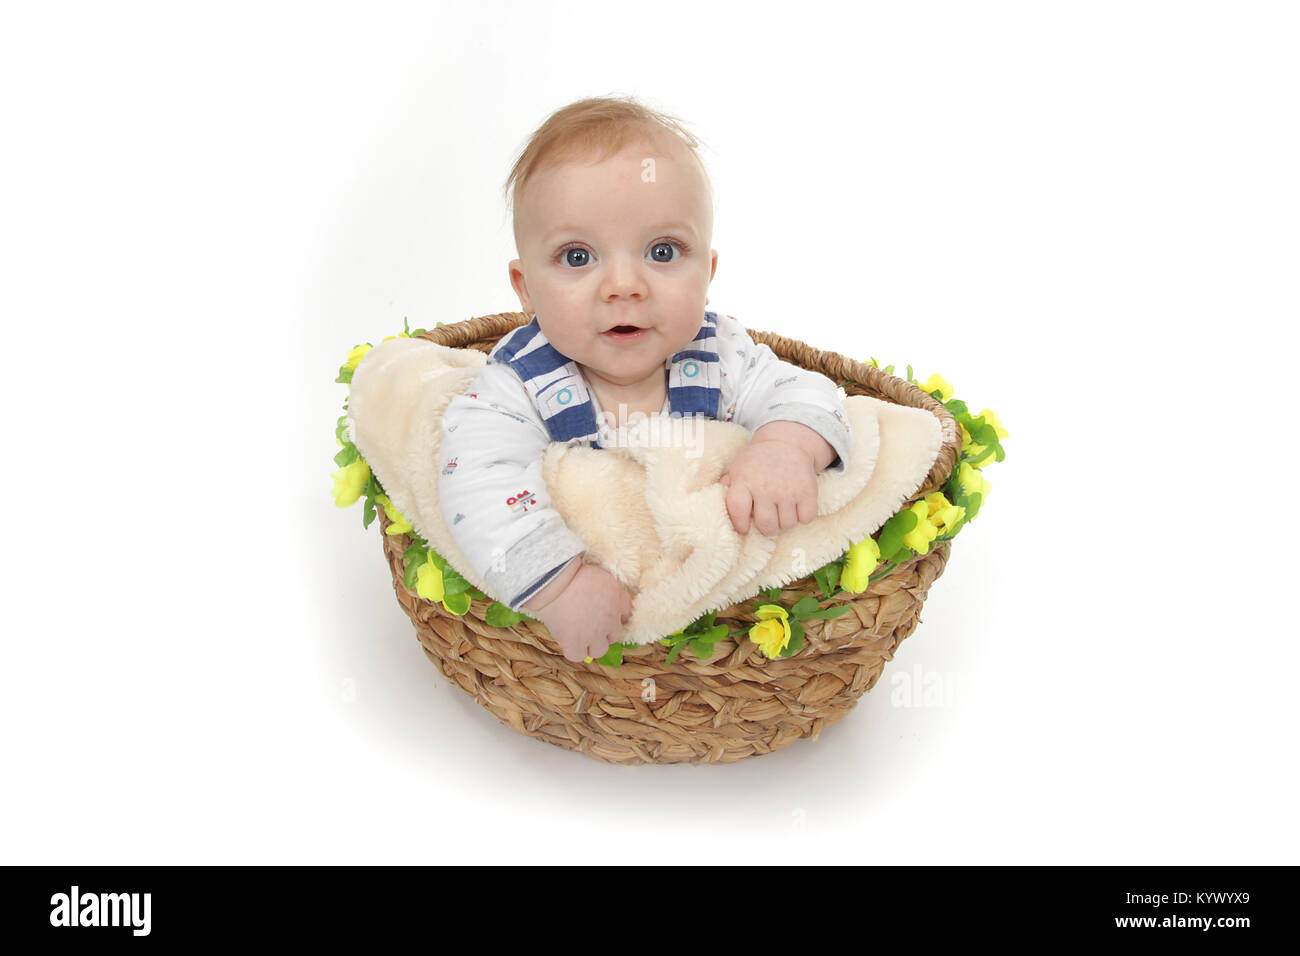 16 week old baby boy exploring in a basket Stock Photo